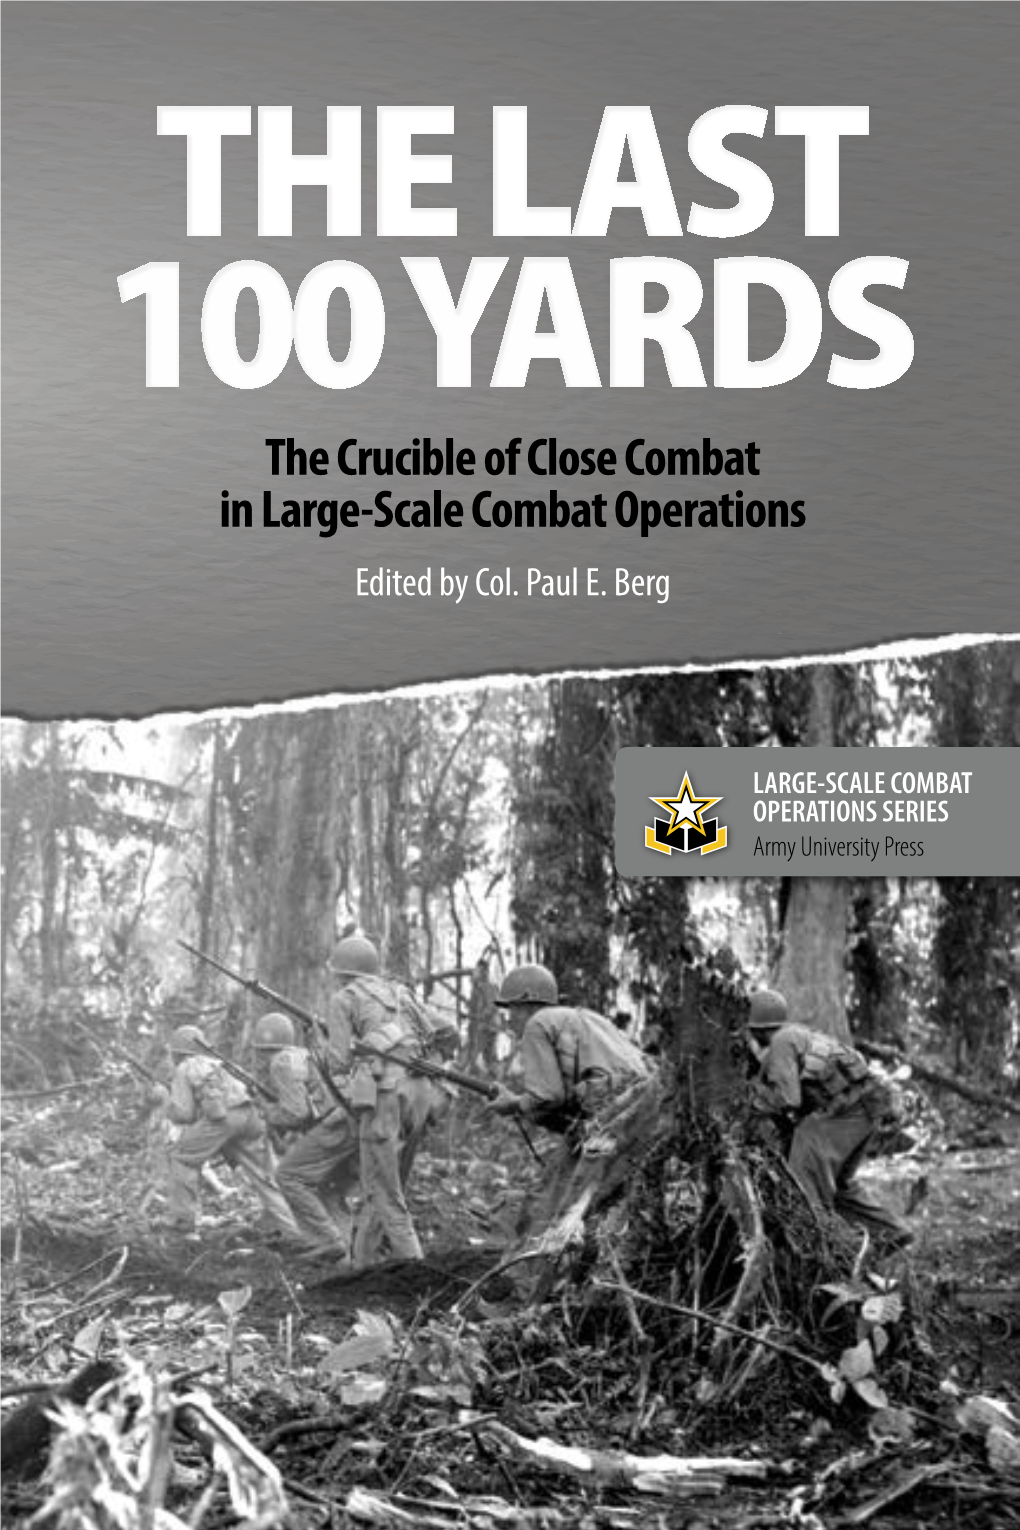 The Crucible of Close Combat in Large-Scale Combat Operations Edited by Col